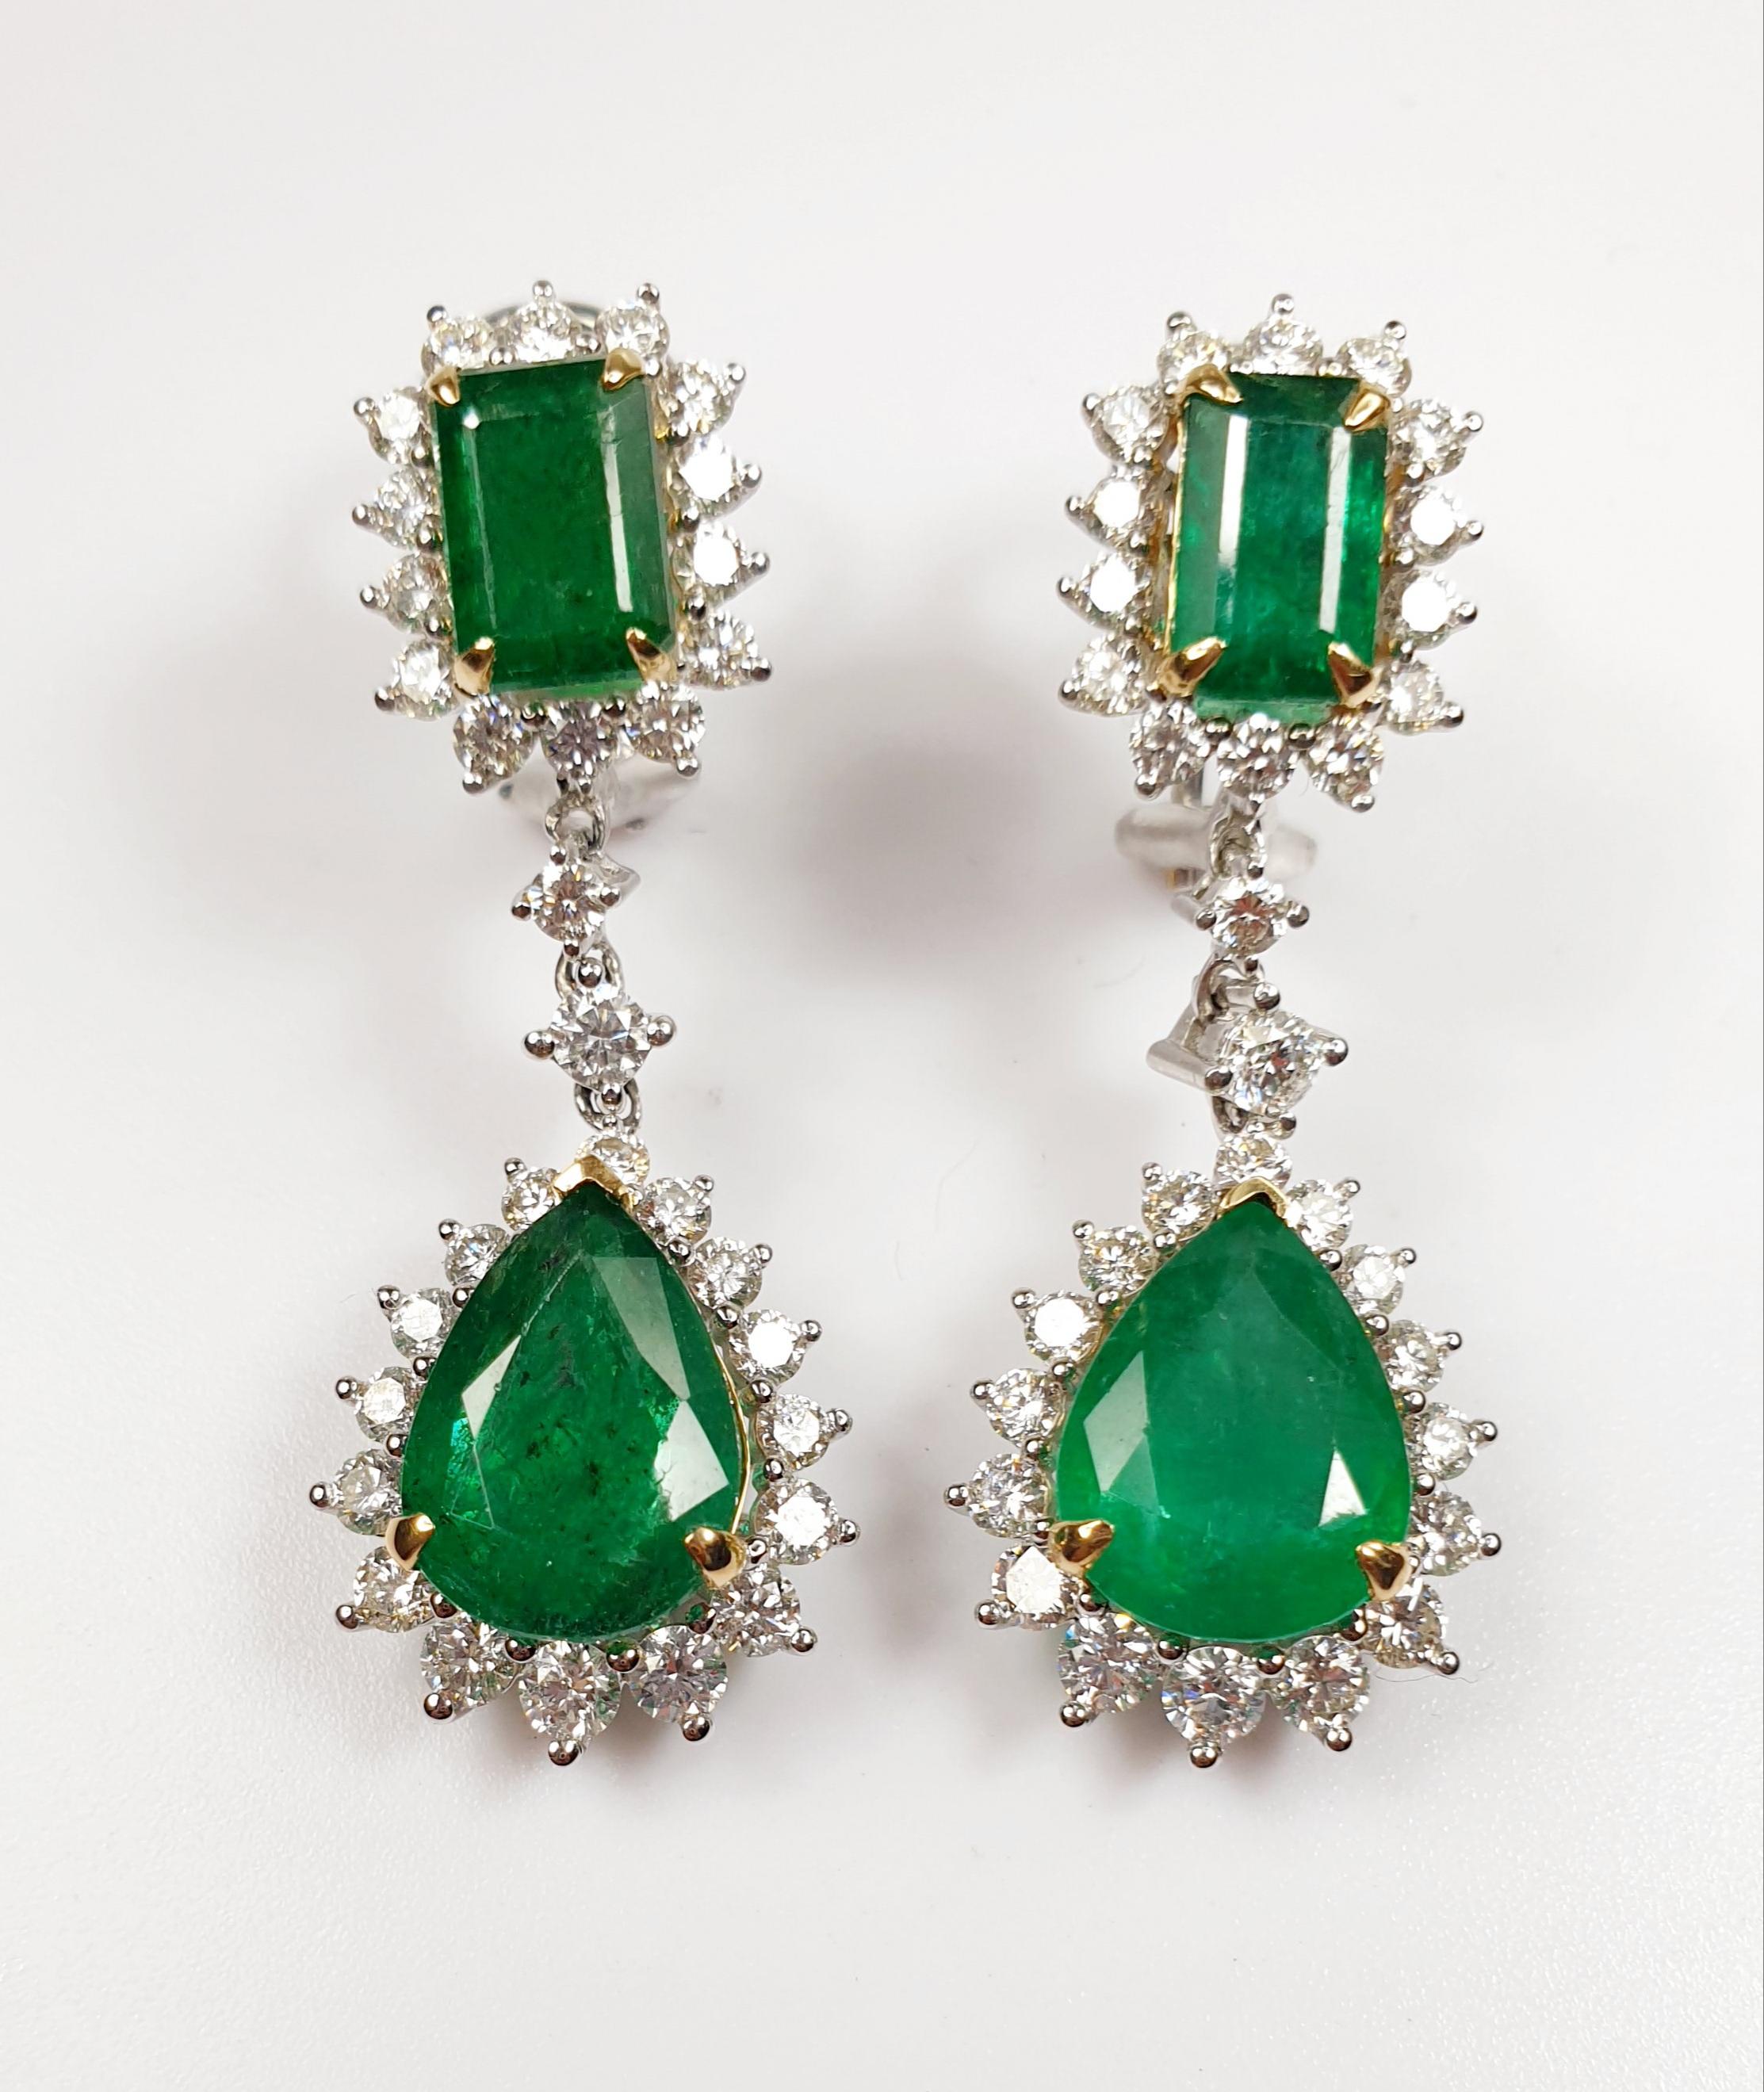 Colombian emerald 8ct earrings with diamonds and  white and yellow gold 
Irama Pradera is a Young designer from Spain that searches always for the best gems and combines classic with contemporary mounting and styles.
She creates many Jewels in her